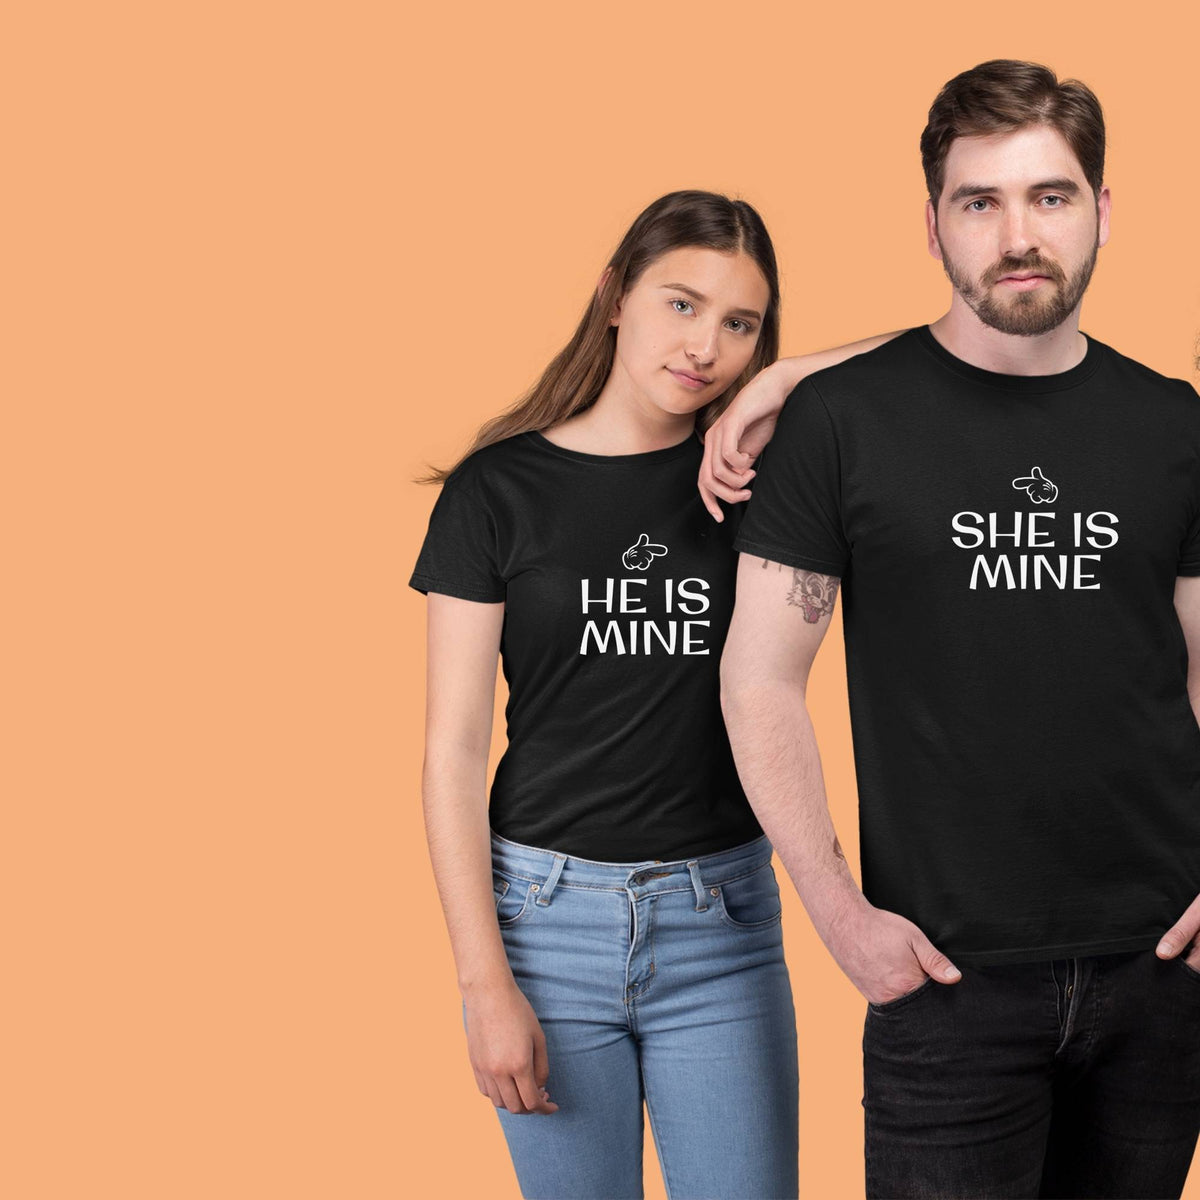 He-is-mine-she-is-mine-couple-t-shirt-with-front-and-back-print-customizable-black-color-premium-quality-gogirgit